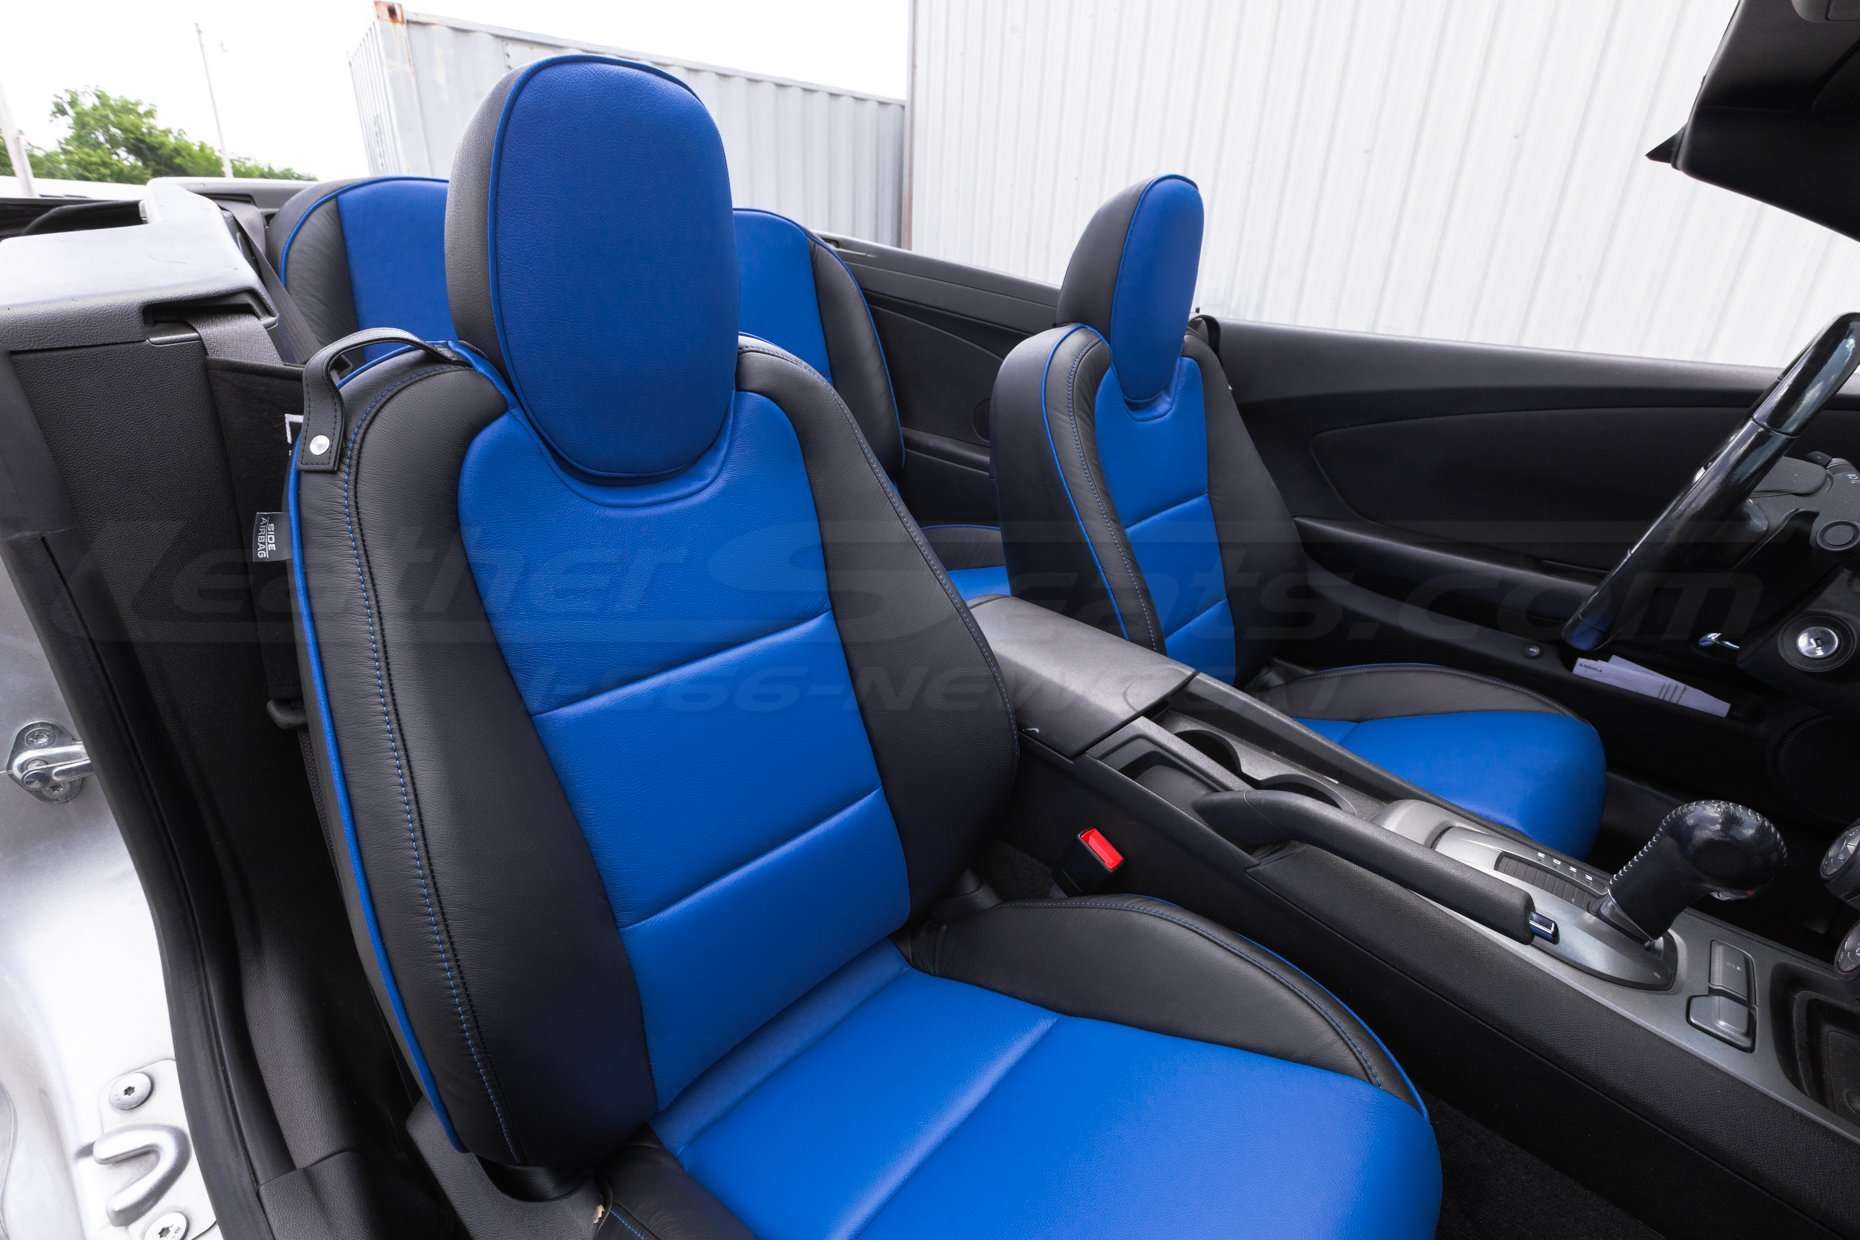 Backrest and headrest section of front passenger Camaro with custom leather seats